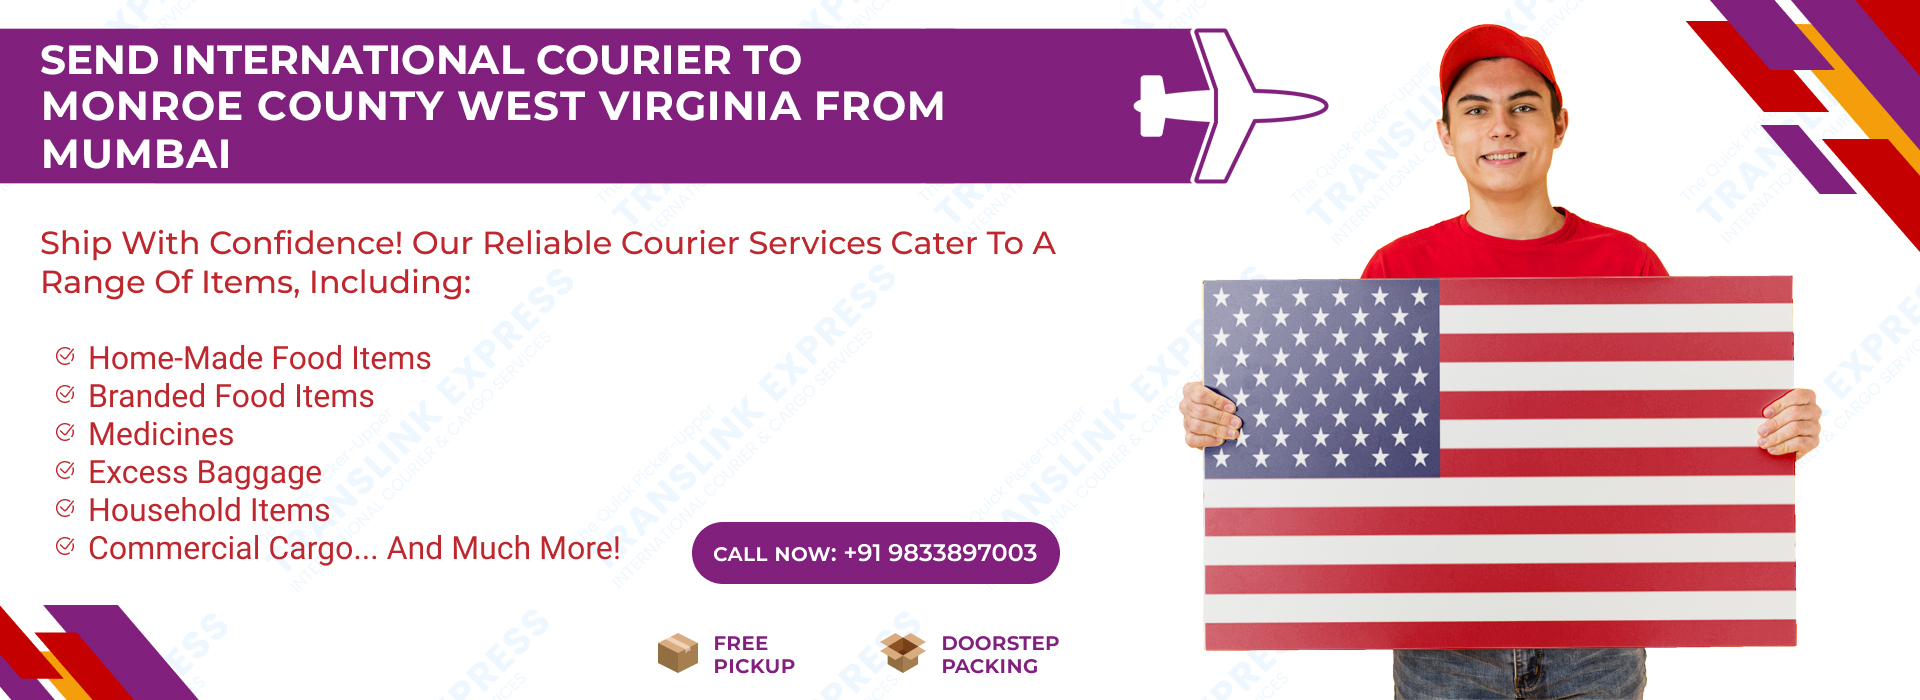 Courier to Monroe County West Virginia From Mumbai